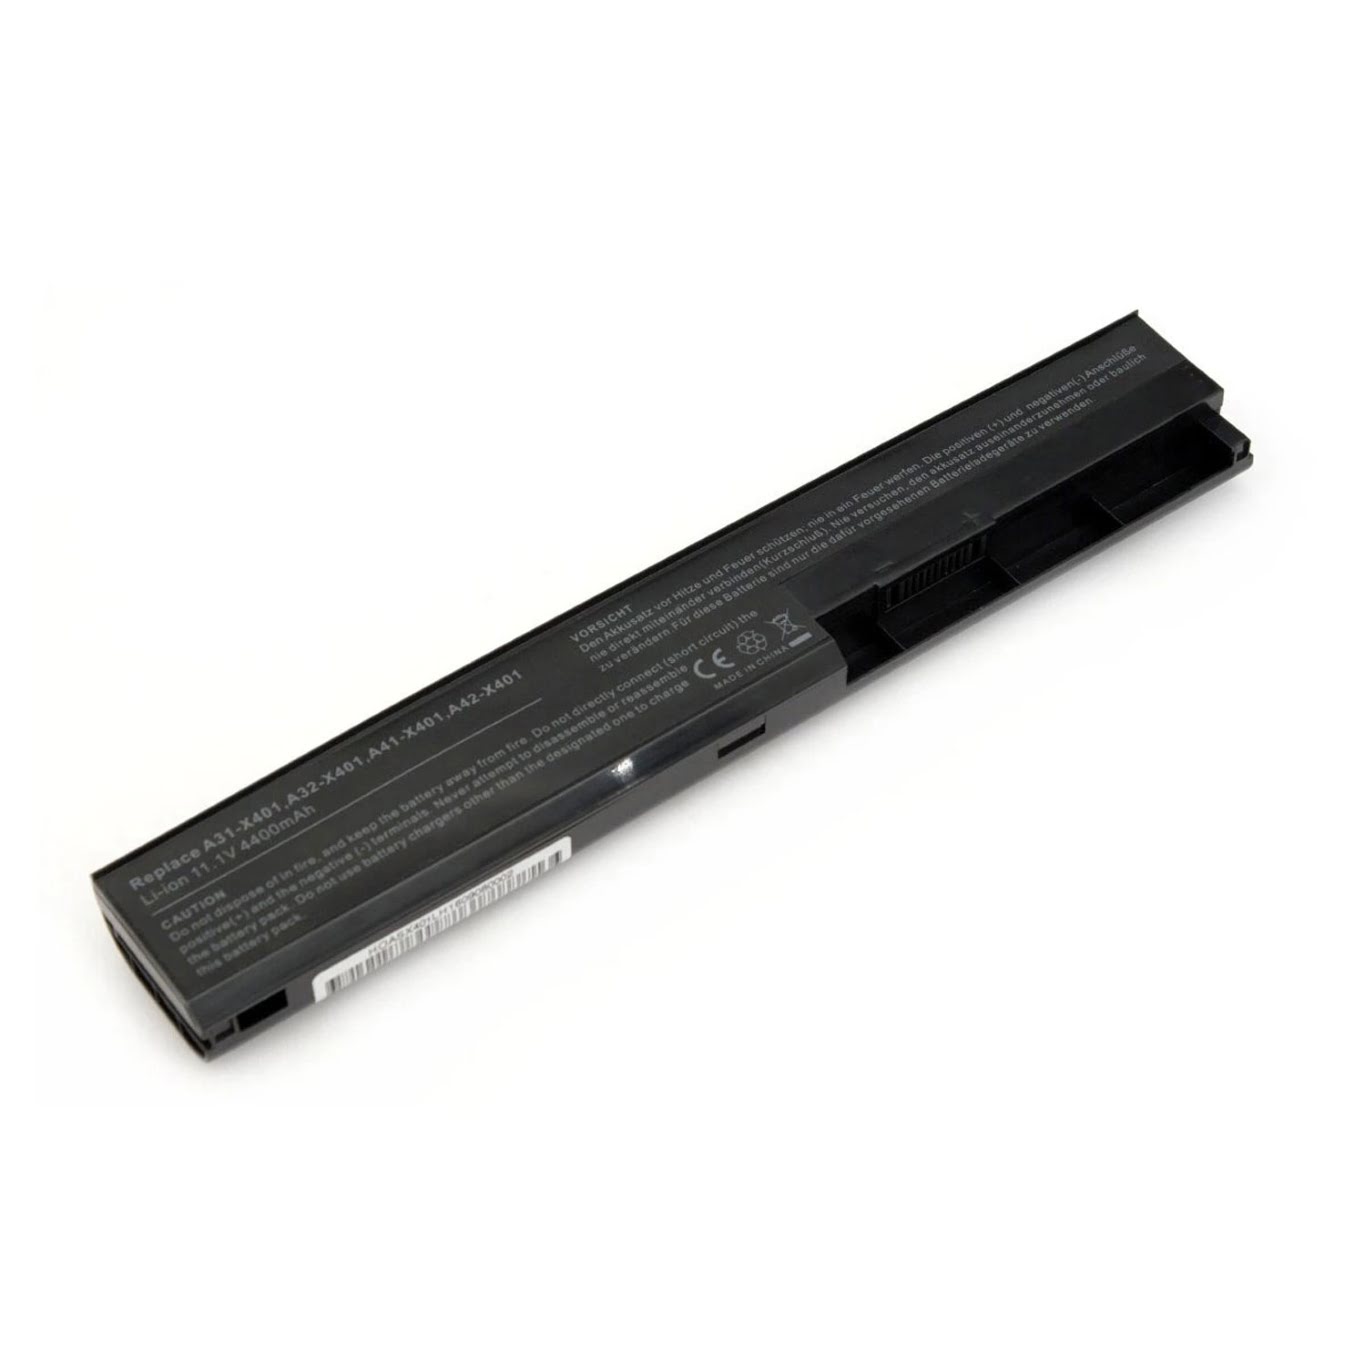 A31-X401, A32-X401 replacement Laptop Battery for Asus F301 Series, F301A Series, 10.8V, 4400mah / 47wh, 6 cells